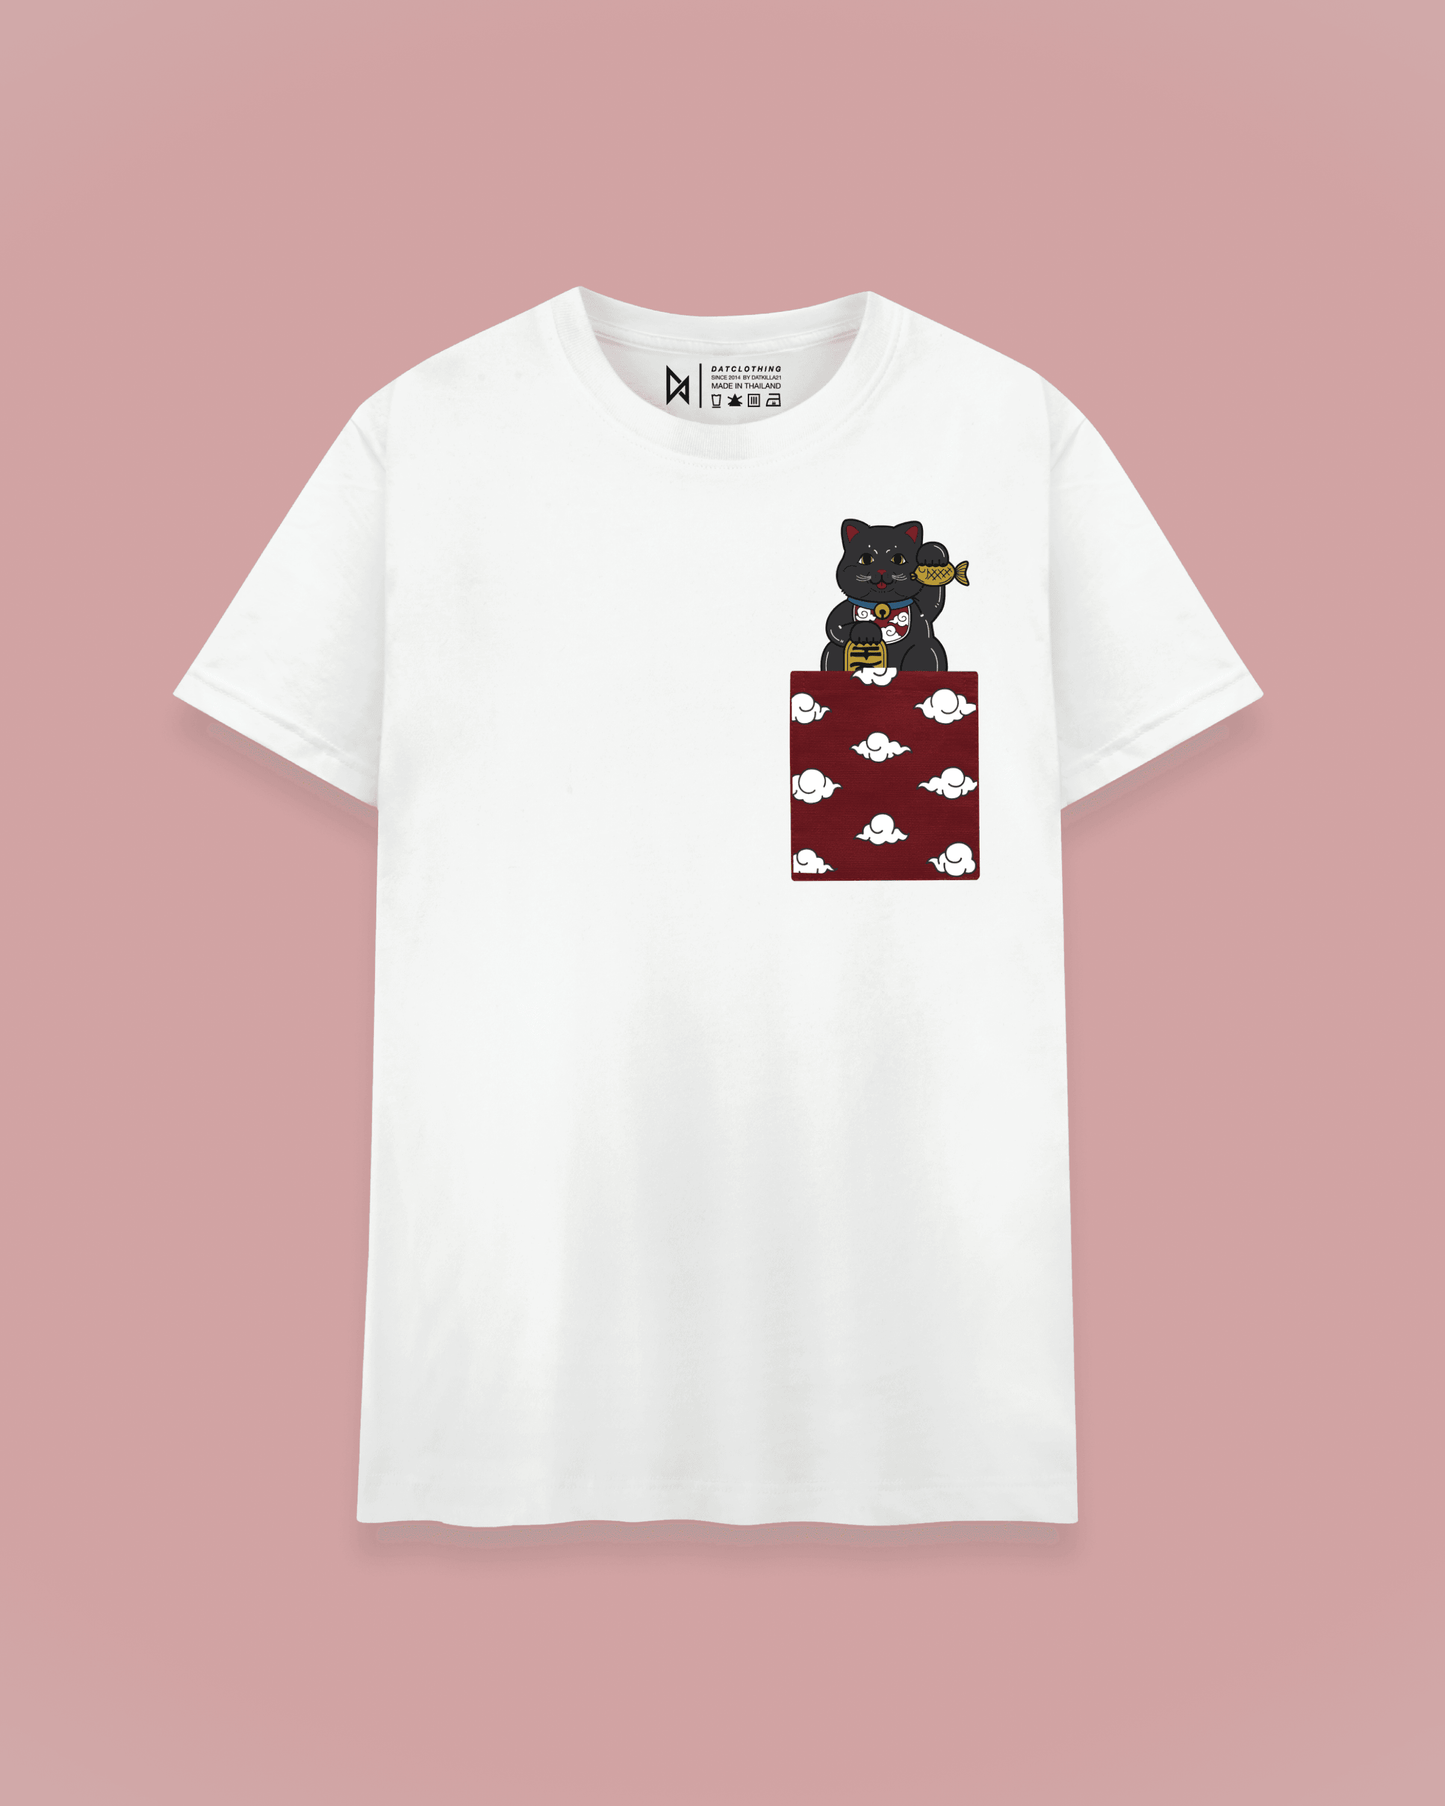 White T-shirt with Maneki Neko print and red pocket with clouds